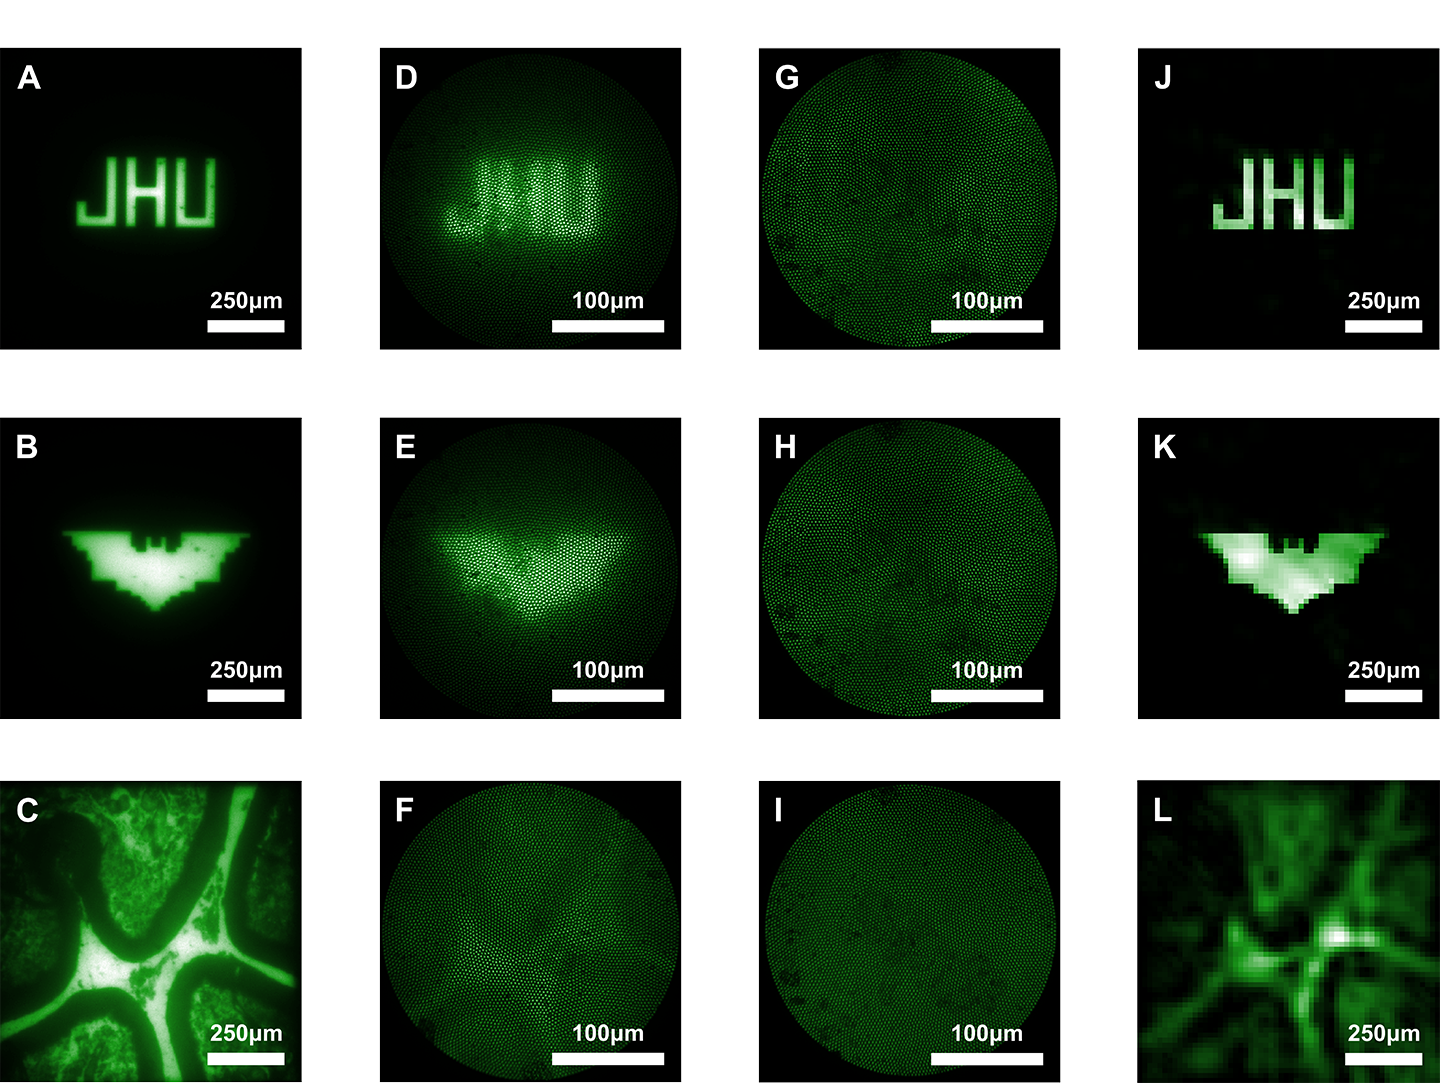 Composite shows 12 images captured by microscopes and microendoscopes to compare clarity